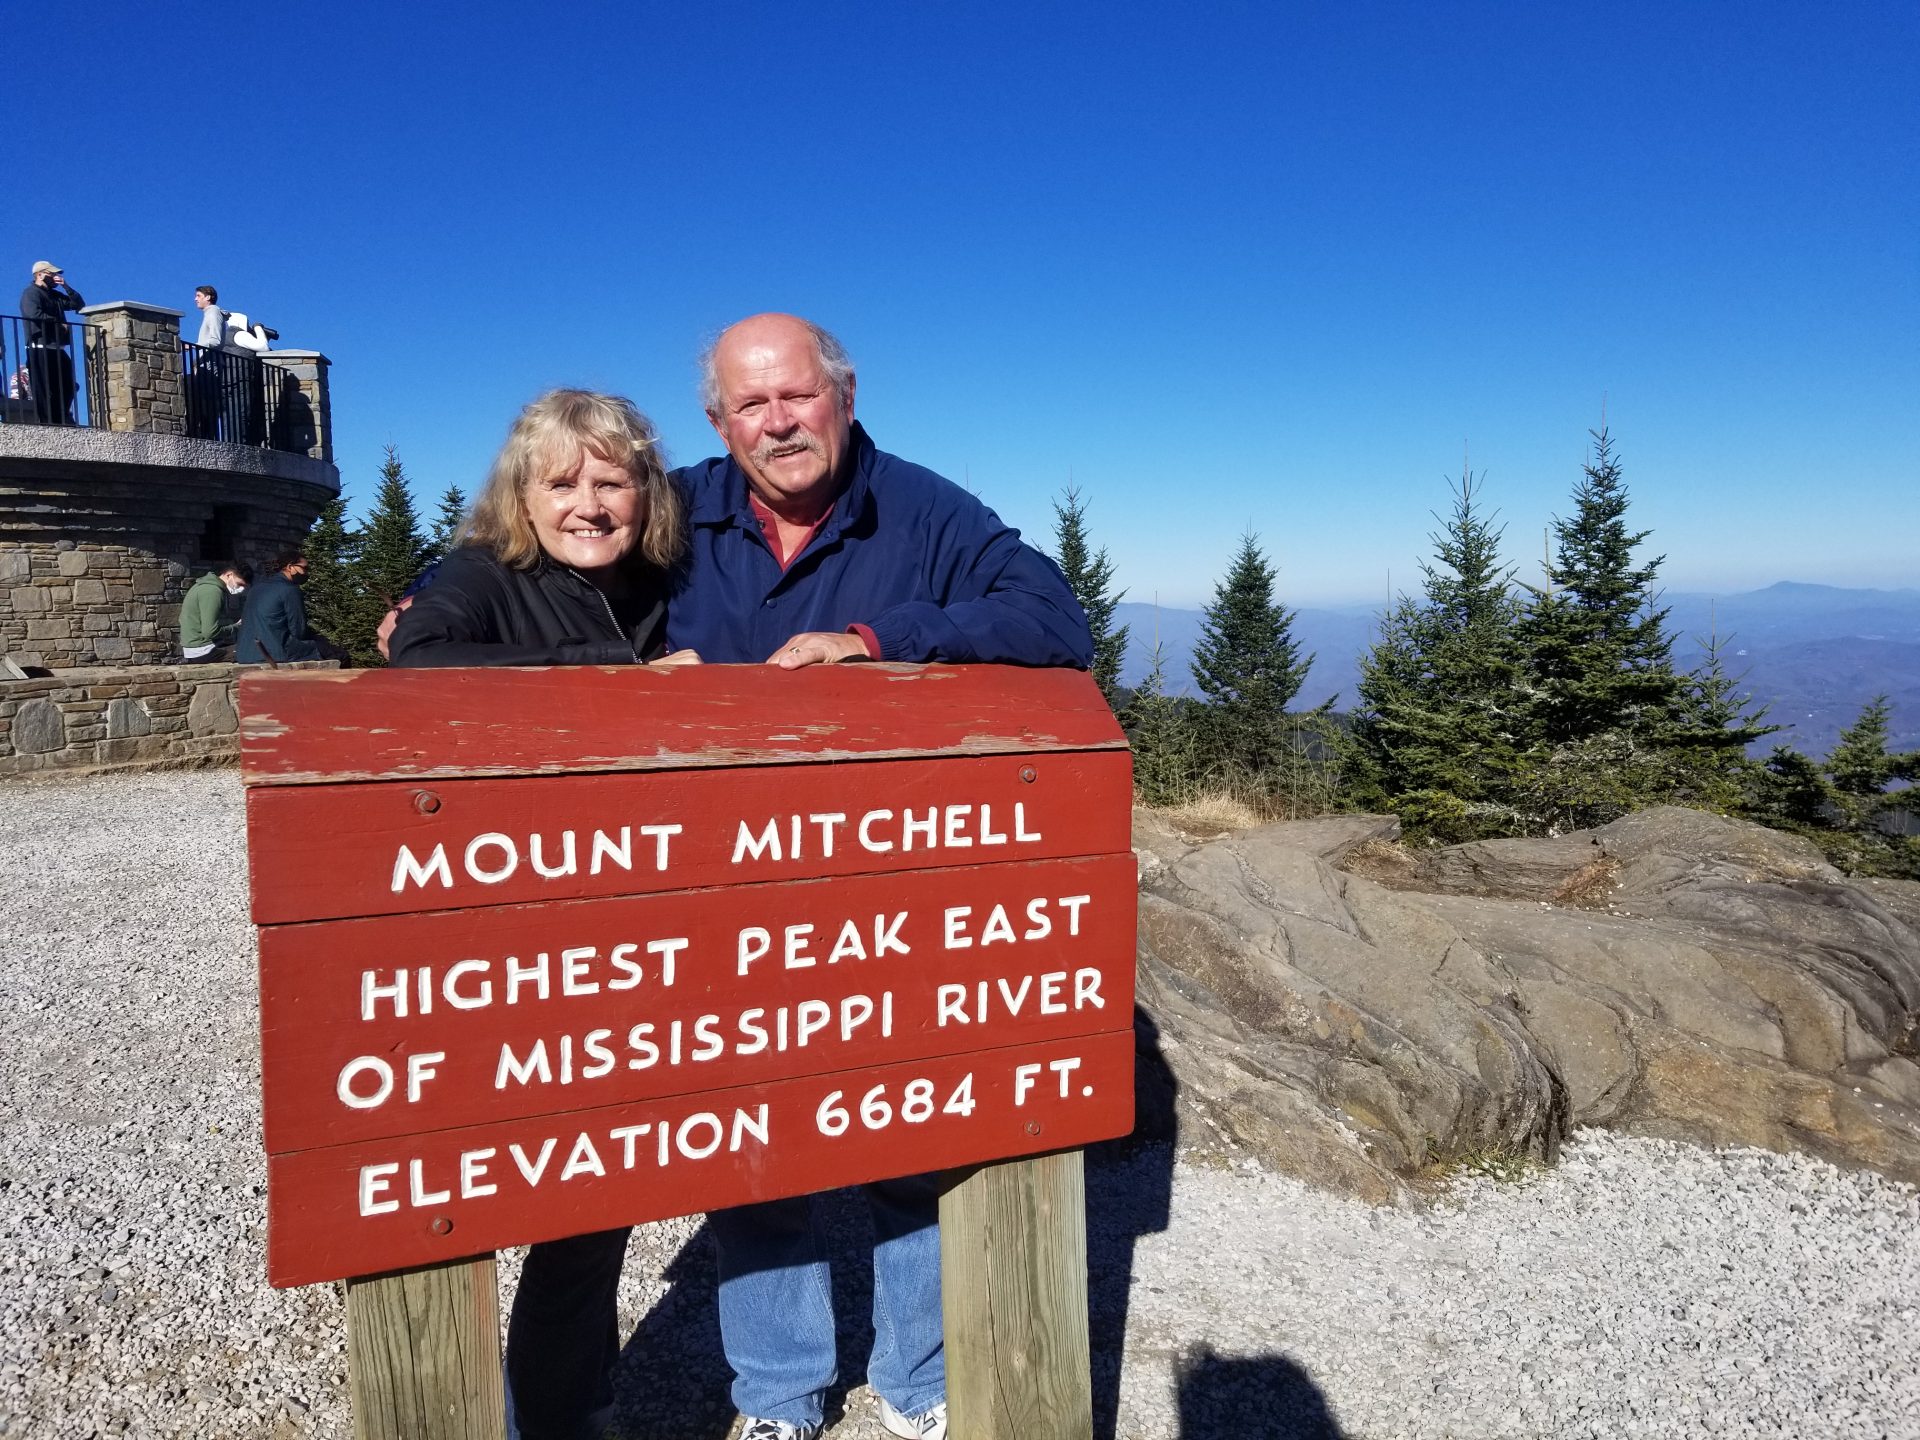 Don loved the mountains. Here he is with Diane at the top of Mount Mitchell from November of 2020.